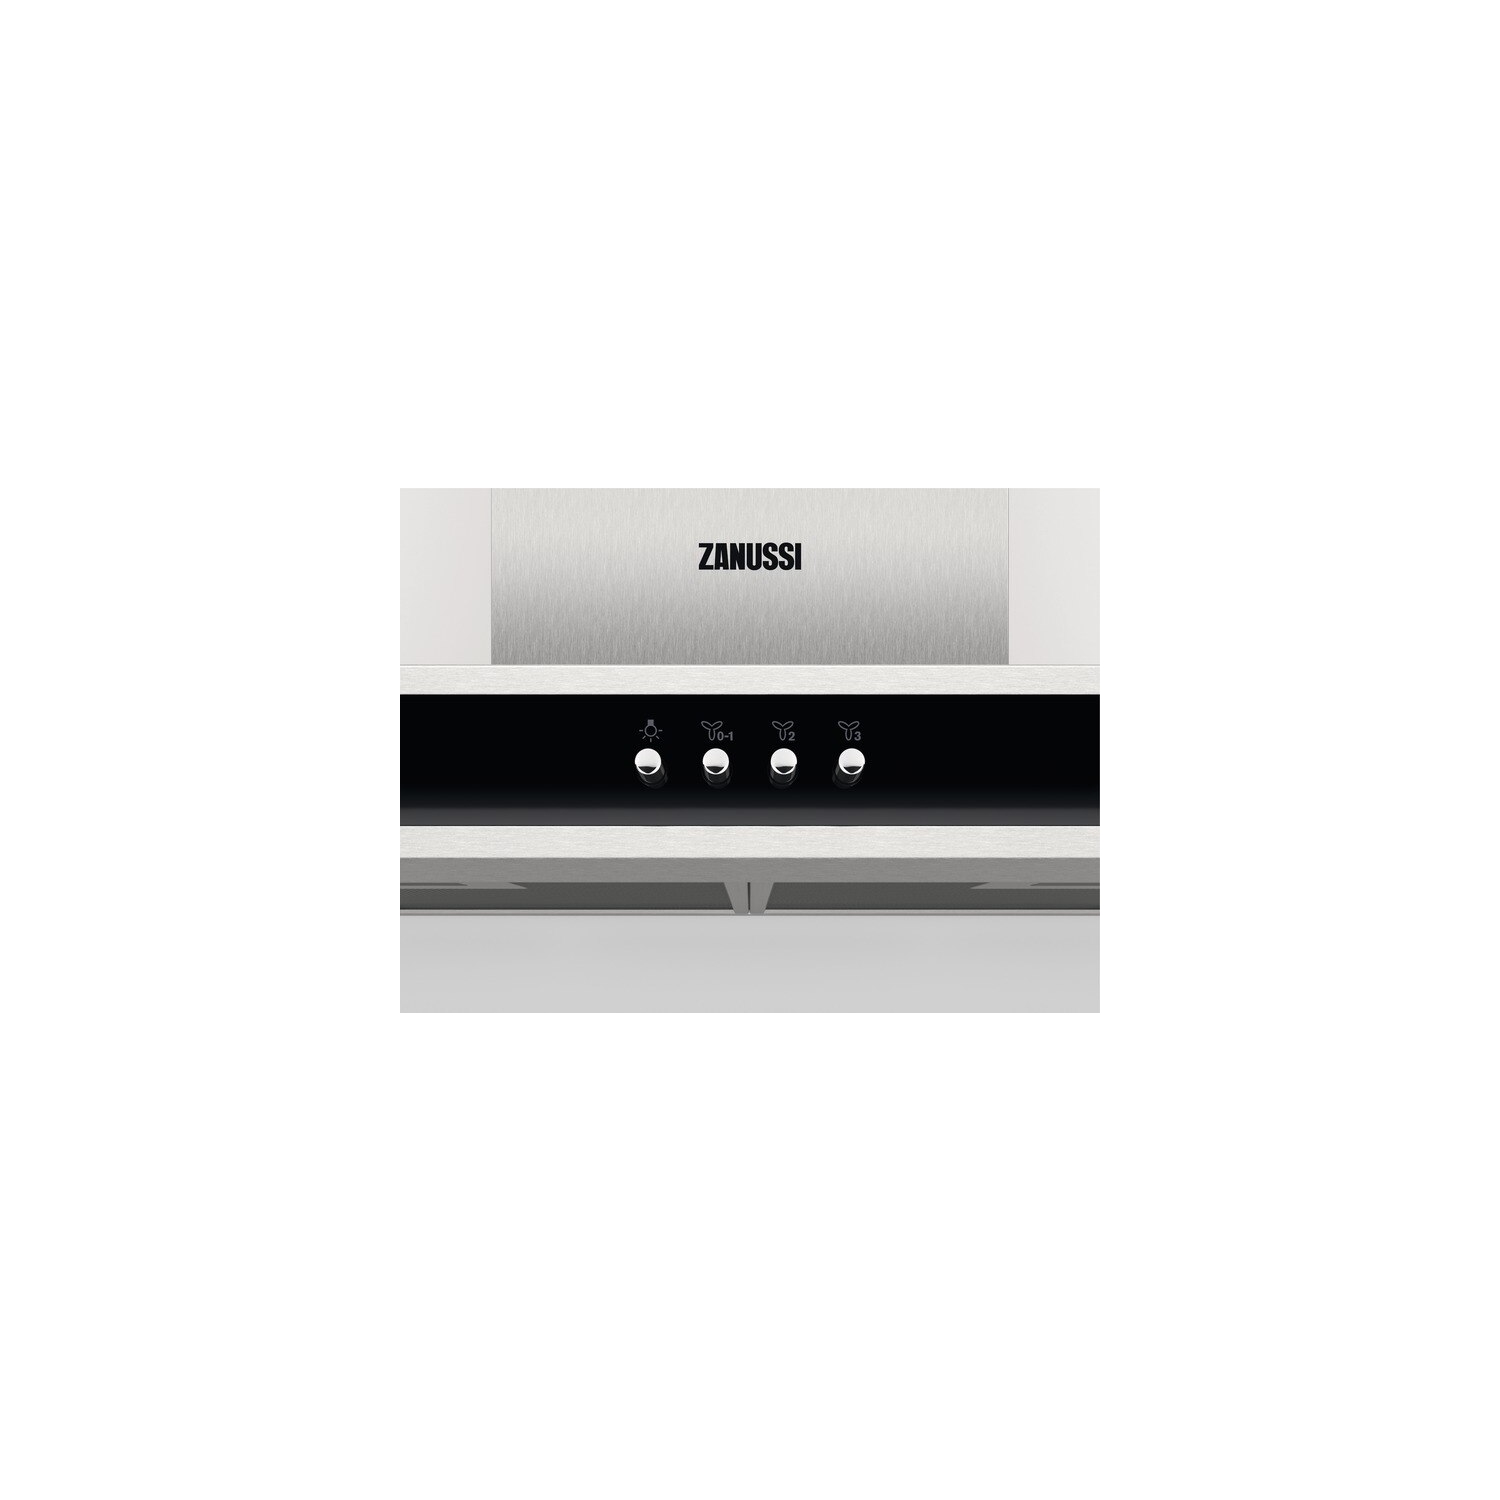 Zanussi 60cm Chimney Hood - Stainless Steel - C Rated - 5